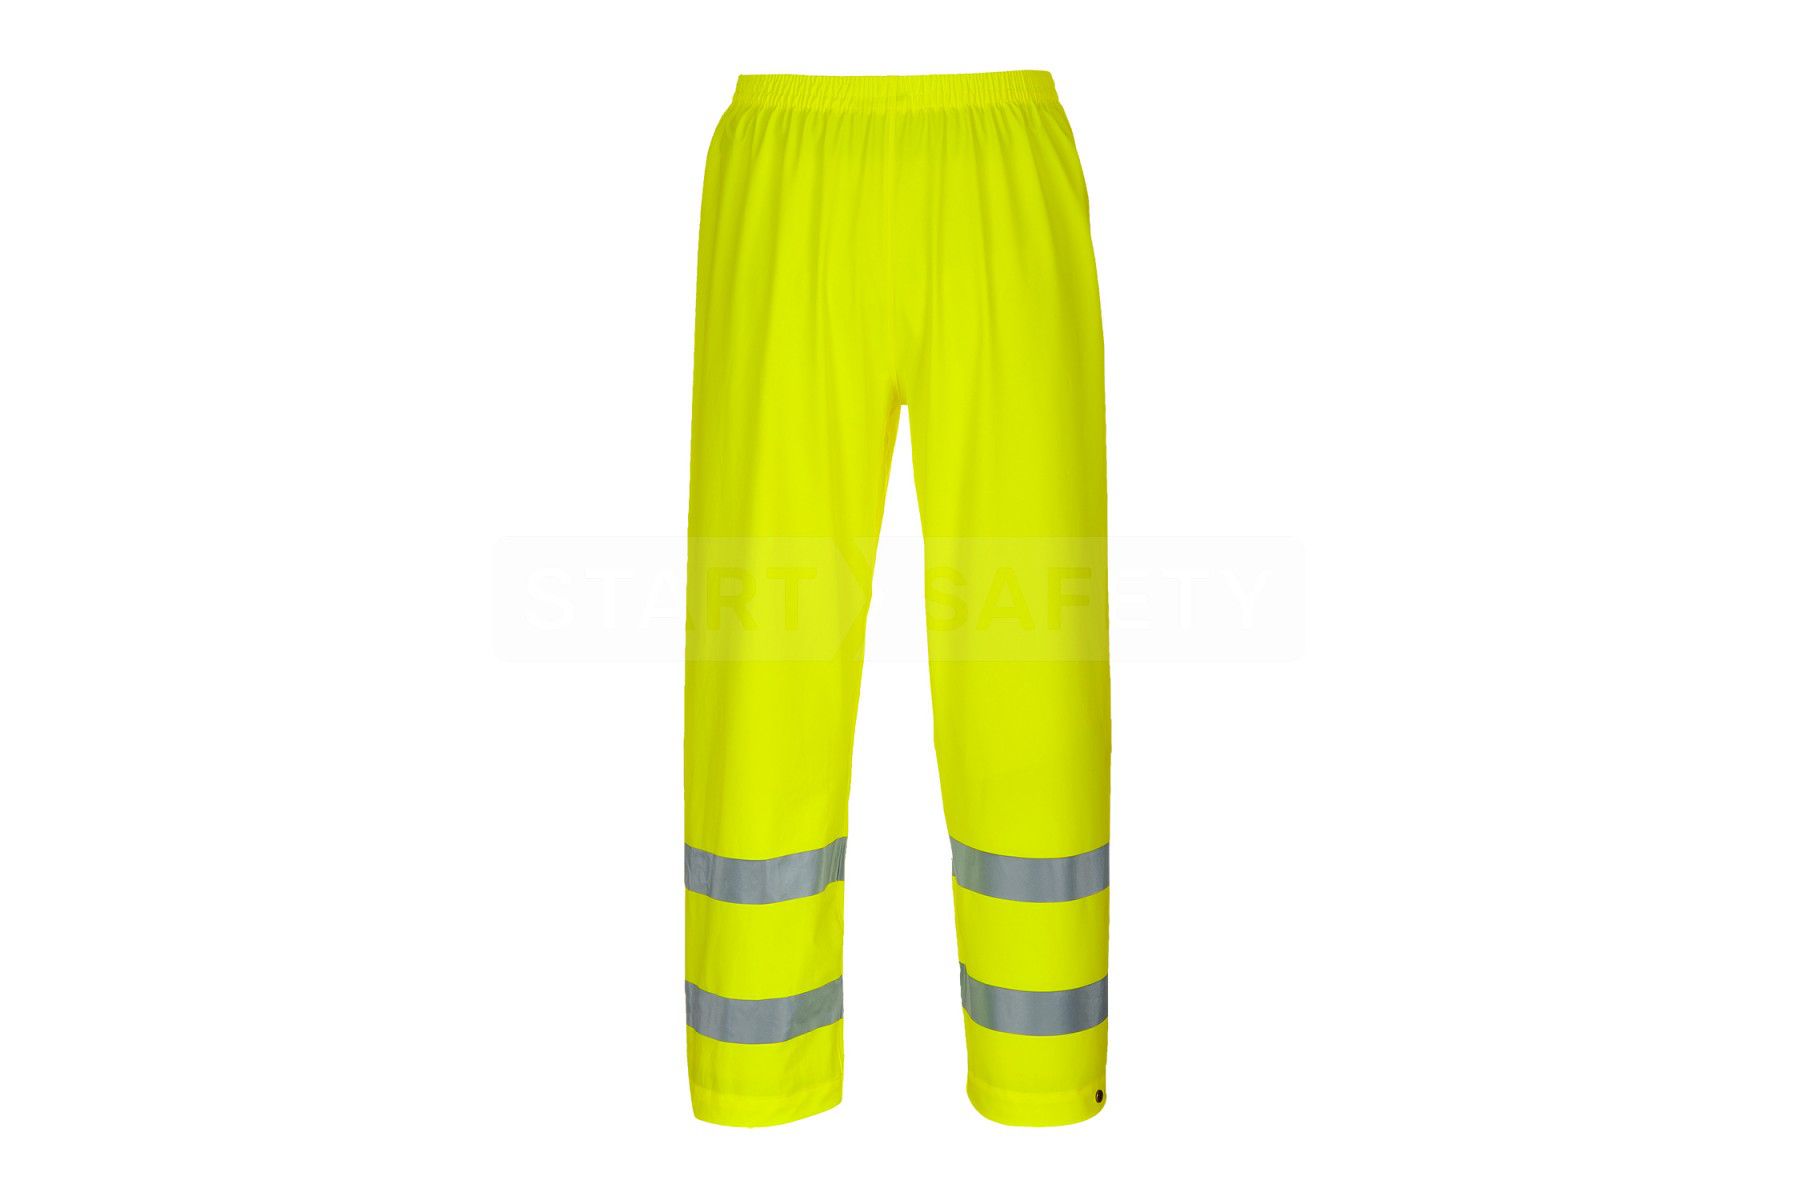 Chicago Protective Apparel Fire Resistant Vinex Pants 606-FR9B with  Reflective Stripe Pattern RA1 — Waist Size: 28, Pants Length: 28 — Legion  Safety Products